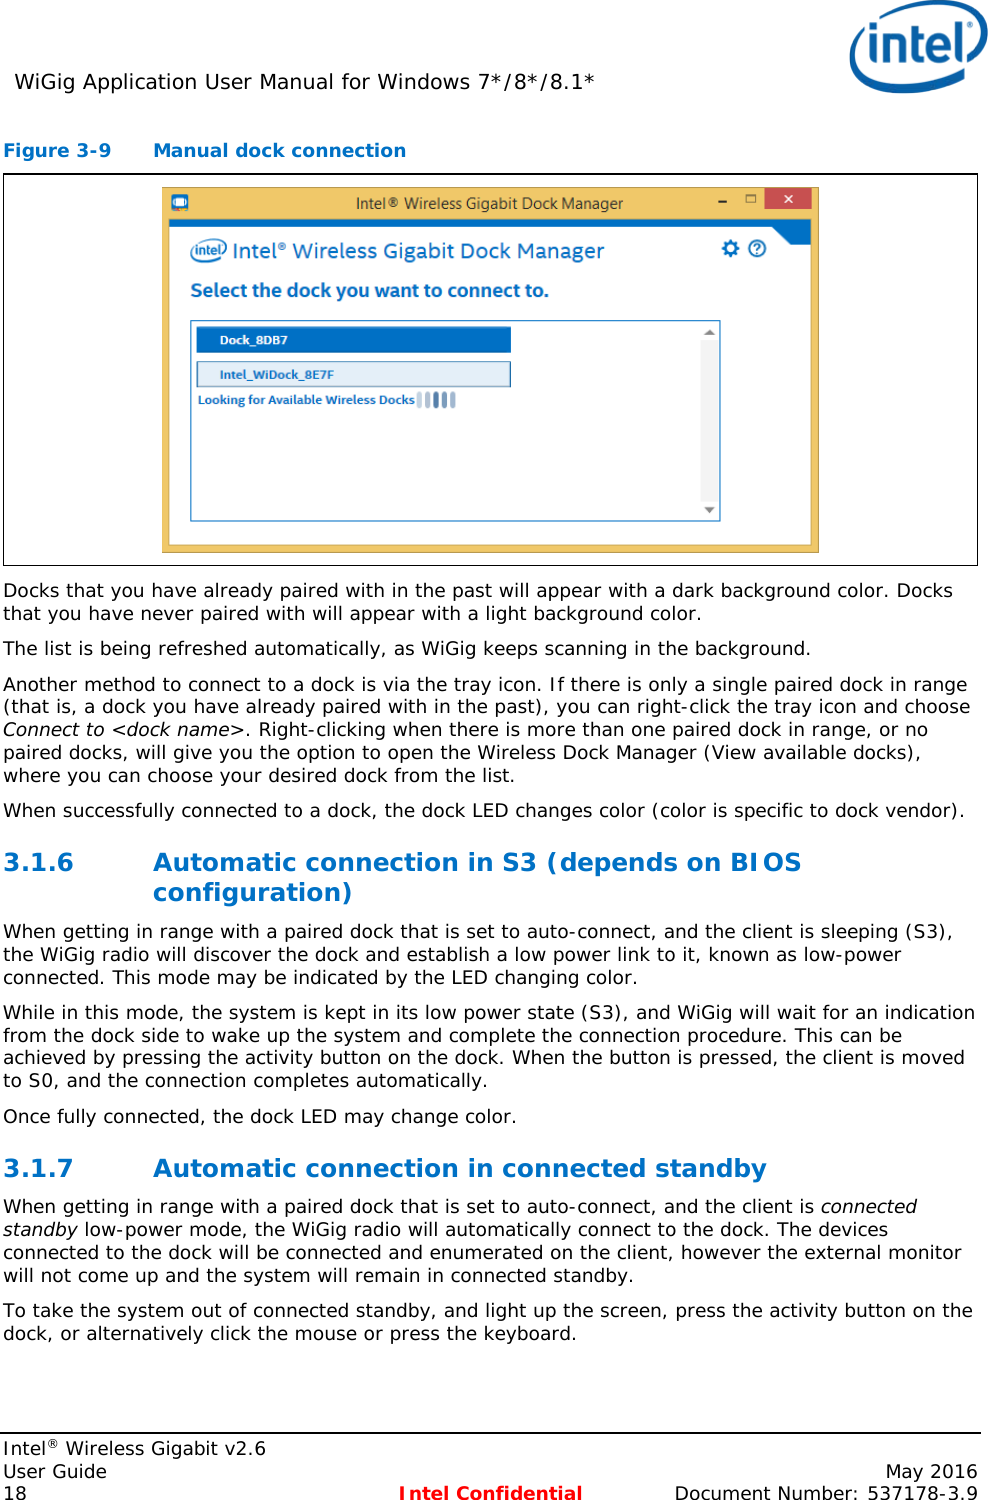 WiGig Application User Manual for Windows 7*/8*/8.1*    Intel® Wireless Gigabit v2.6 User Guide    May 2016 18 Intel Confidential Document Number: 537178-3.9 Figure 3-9  Manual dock connection  Docks that you have already paired with in the past will appear with a dark background color. Docks that you have never paired with will appear with a light background color. The list is being refreshed automatically, as WiGig keeps scanning in the background. Another method to connect to a dock is via the tray icon. If there is only a single paired dock in range (that is, a dock you have already paired with in the past), you can right-click the tray icon and choose Connect to &lt;dock name&gt;. Right-clicking when there is more than one paired dock in range, or no paired docks, will give you the option to open the Wireless Dock Manager (View available docks), where you can choose your desired dock from the list. When successfully connected to a dock, the dock LED changes color (color is specific to dock vendor). 3.1.6 Automatic connection in S3 (depends on BIOS configuration) When getting in range with a paired dock that is set to auto-connect, and the client is sleeping (S3), the WiGig radio will discover the dock and establish a low power link to it, known as low-power connected. This mode may be indicated by the LED changing color. While in this mode, the system is kept in its low power state (S3), and WiGig will wait for an indication from the dock side to wake up the system and complete the connection procedure. This can be achieved by pressing the activity button on the dock. When the button is pressed, the client is moved to S0, and the connection completes automatically. Once fully connected, the dock LED may change color. 3.1.7 Automatic connection in connected standby When getting in range with a paired dock that is set to auto-connect, and the client is connected standby low-power mode, the WiGig radio will automatically connect to the dock. The devices connected to the dock will be connected and enumerated on the client, however the external monitor will not come up and the system will remain in connected standby. To take the system out of connected standby, and light up the screen, press the activity button on the dock, or alternatively click the mouse or press the keyboard. 